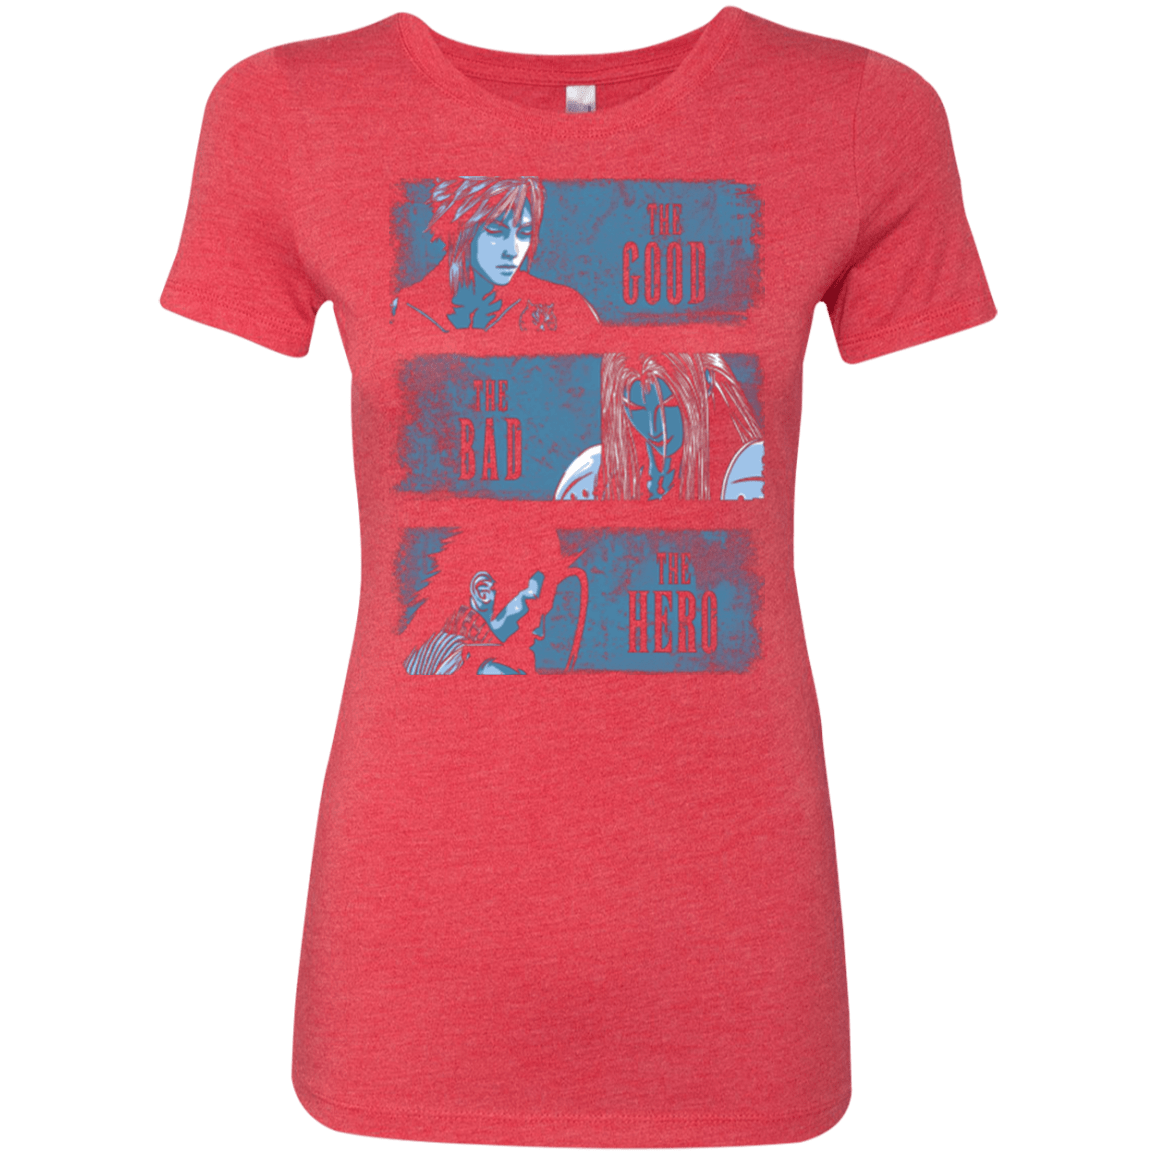 T-Shirts Vintage Red / Small The Good the Bad and the Hero Women's Triblend T-Shirt